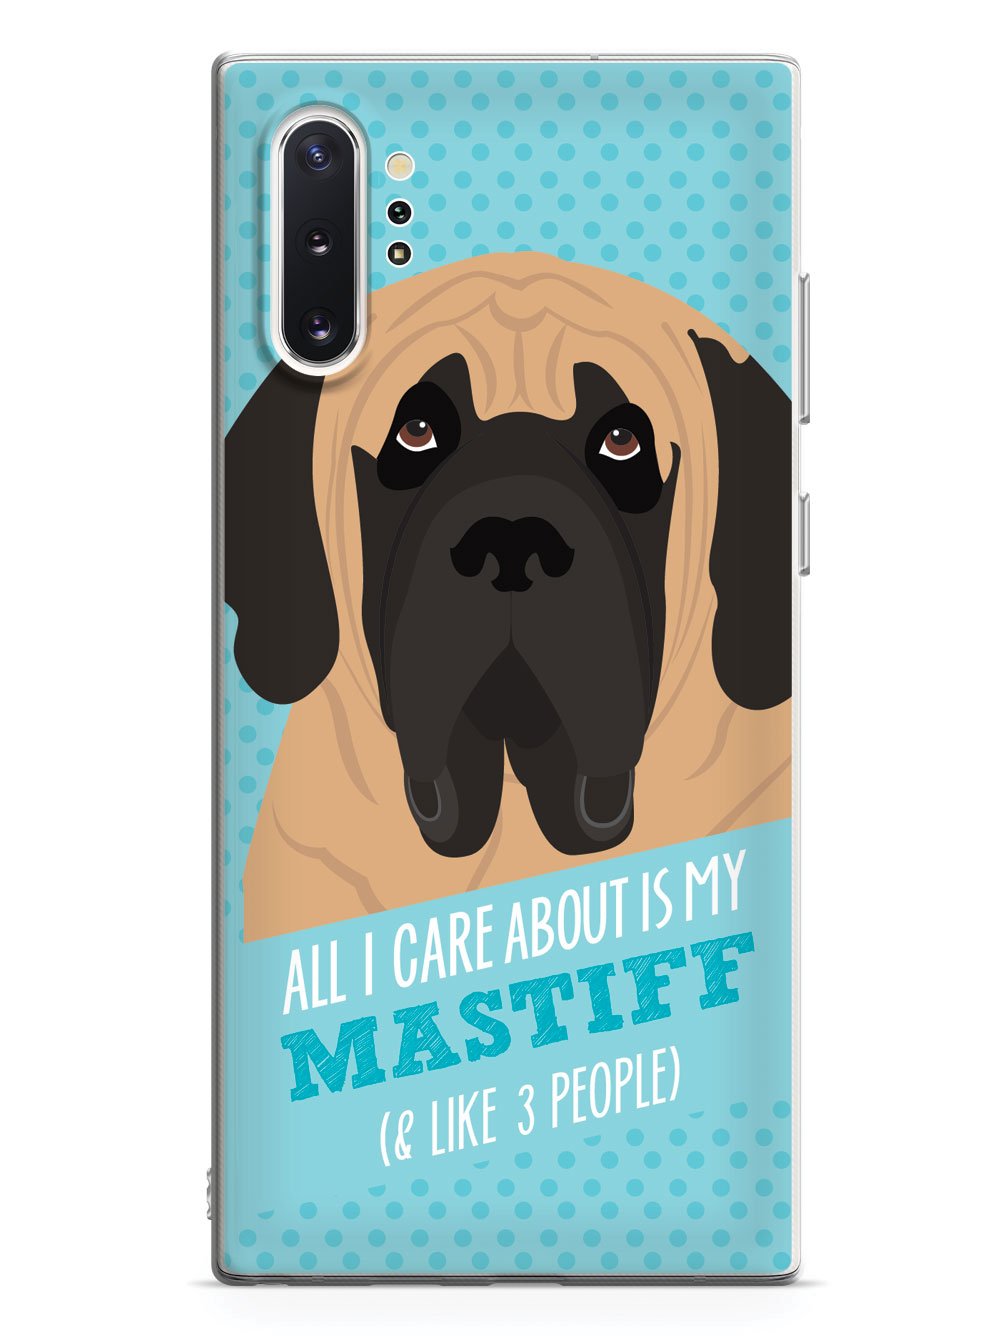 All I Care About Is My Mastiff Case